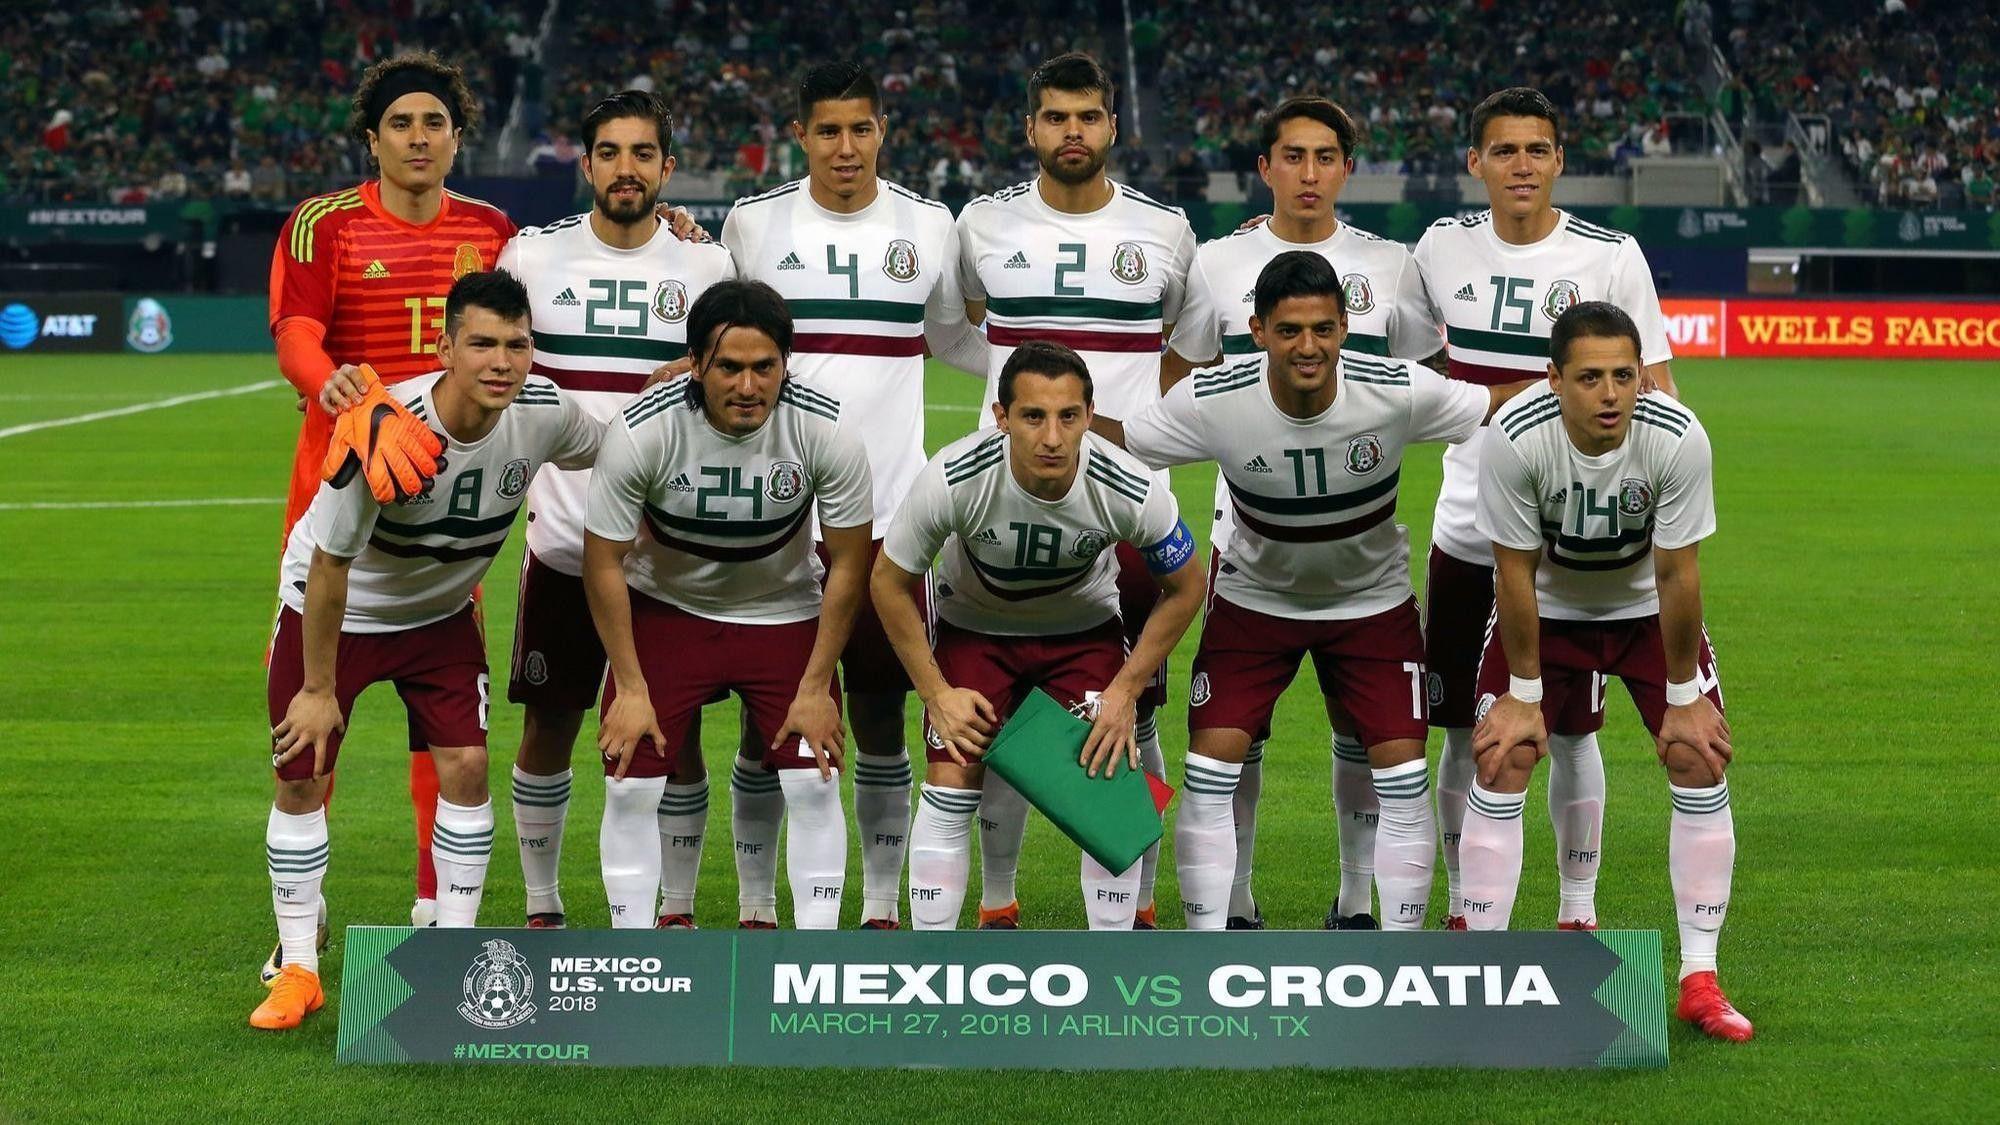 Mexican Soccer Team 2018 Wallpapers.